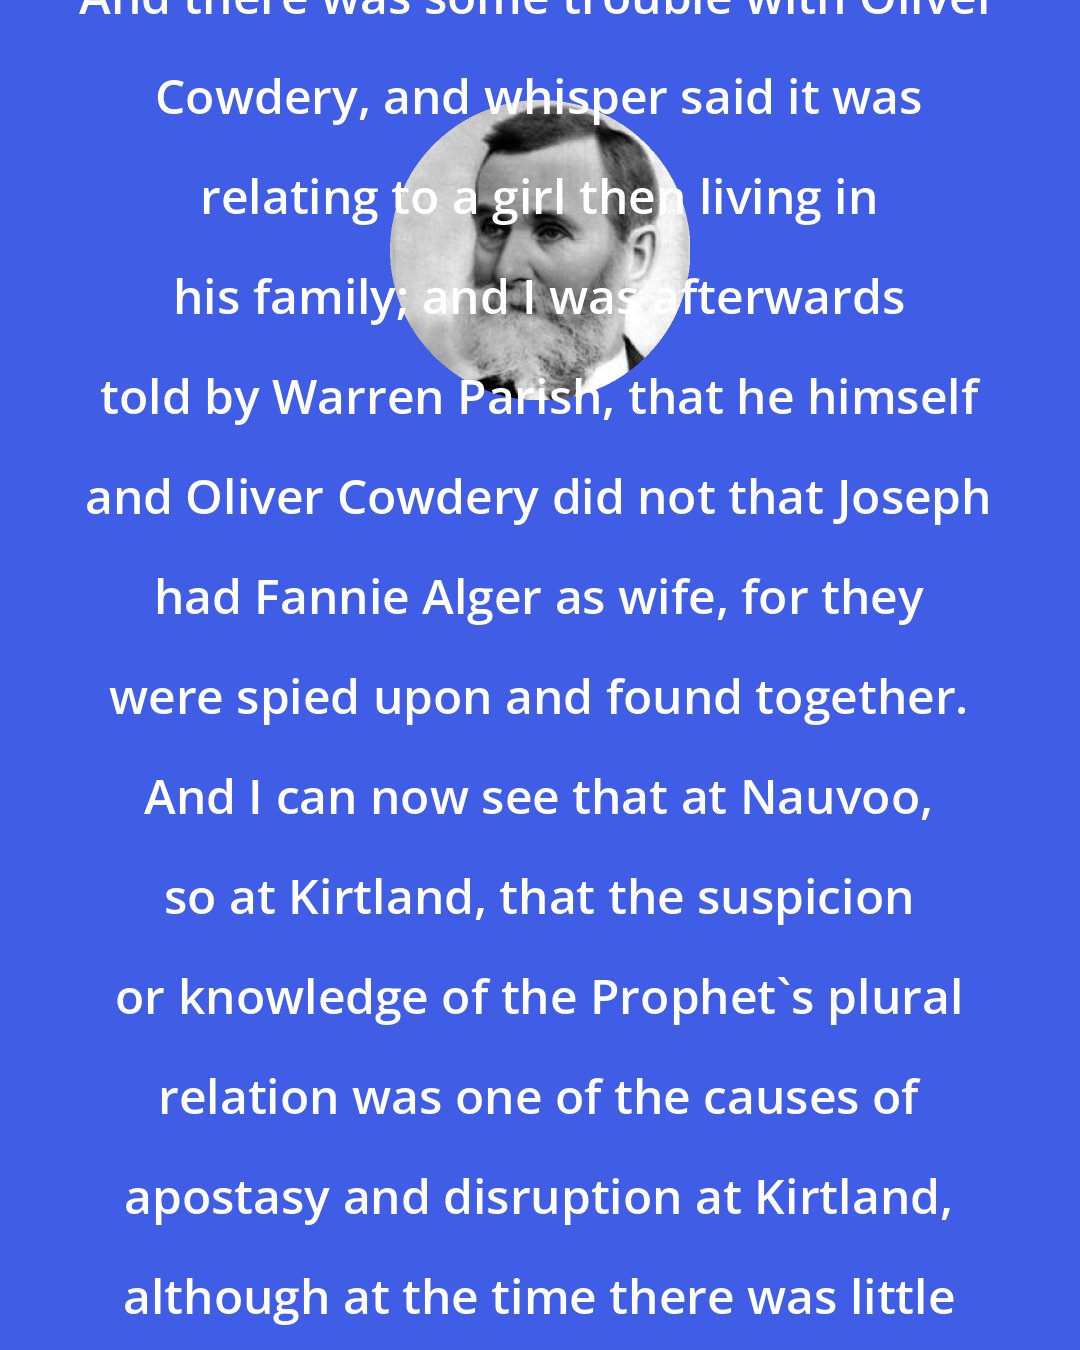 Benjamin F. Johnson: And there was some trouble with Oliver Cowdery, and whisper said it was relating to a girl then living in his family; and I was afterwards told by Warren Parish, that he himself and Oliver Cowdery did not that Joseph had Fannie Alger as wife, for they were spied upon and found together. And I can now see that at Nauvoo, so at Kirtland, that the suspicion or knowledge of the Prophet's plural relation was one of the causes of apostasy and disruption at Kirtland, although at the time there was little said publicly on the subject.